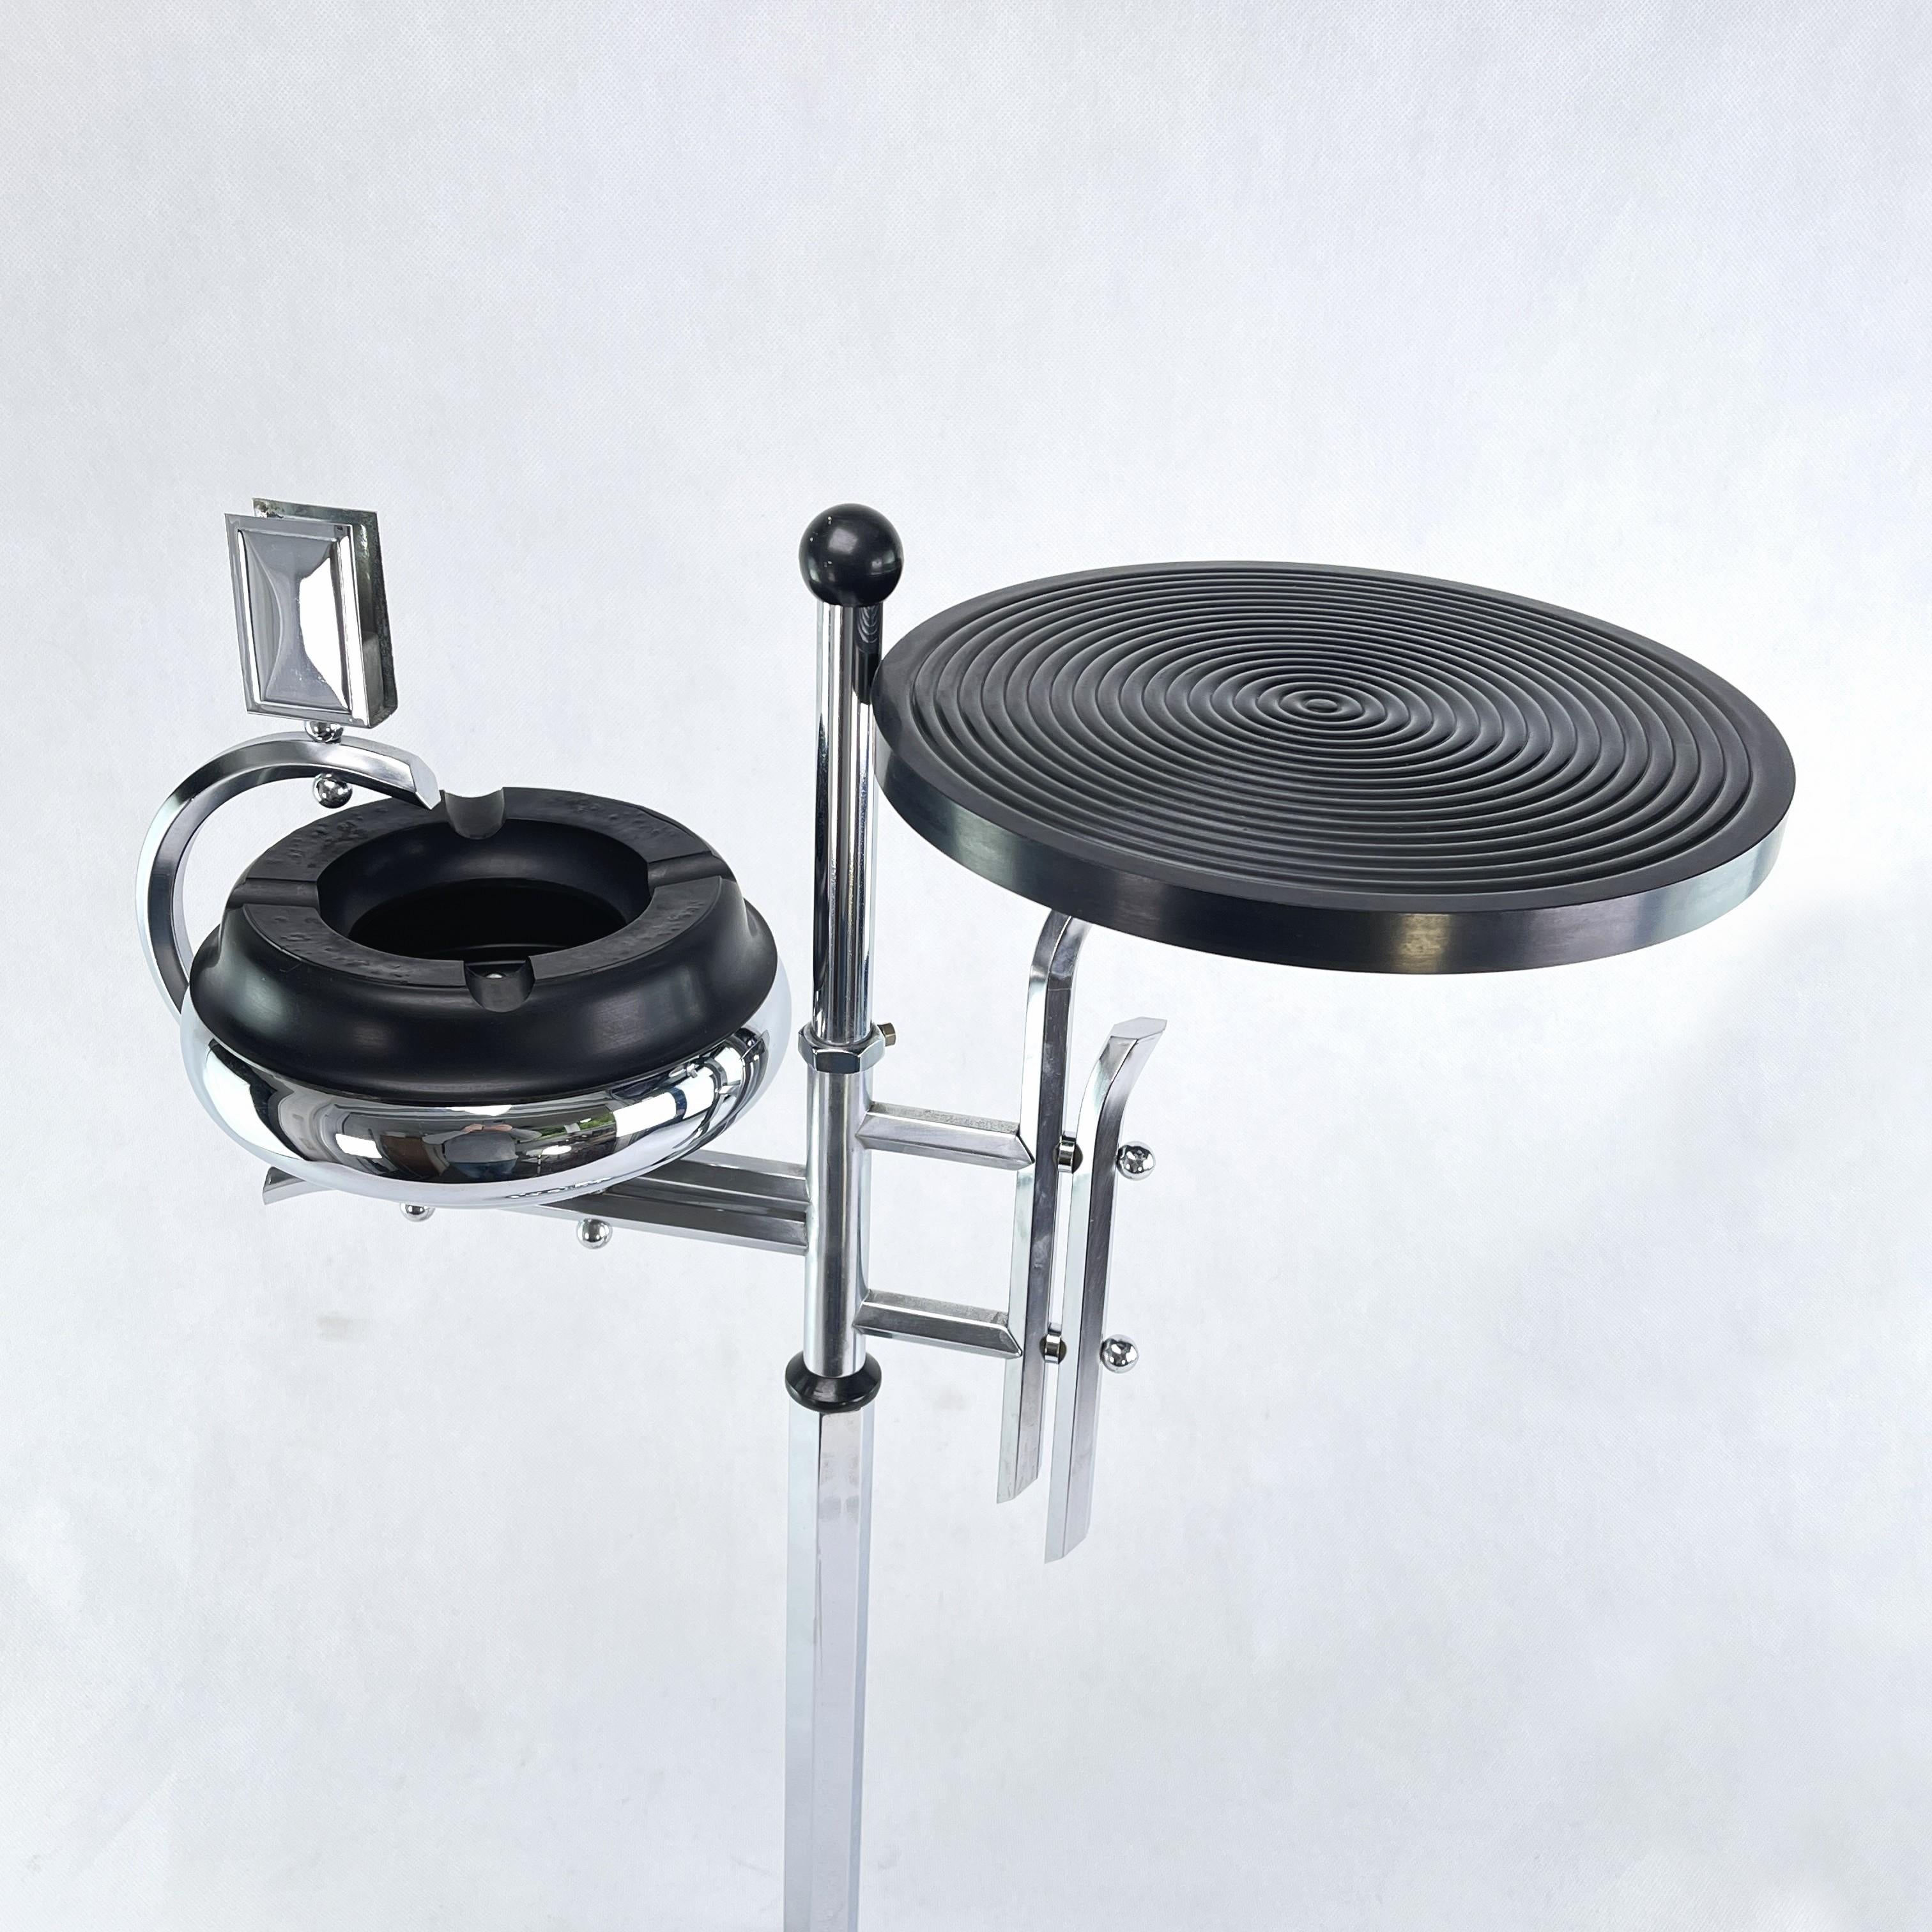 Art Deco ashtray stand

This beautiful and rare Art Deco Ashtray Stand from the 20s/30s is in the streamline modern art deco style. The designer of this extraordinary object has succeeded in combining functionality, design, style and aesthetics.